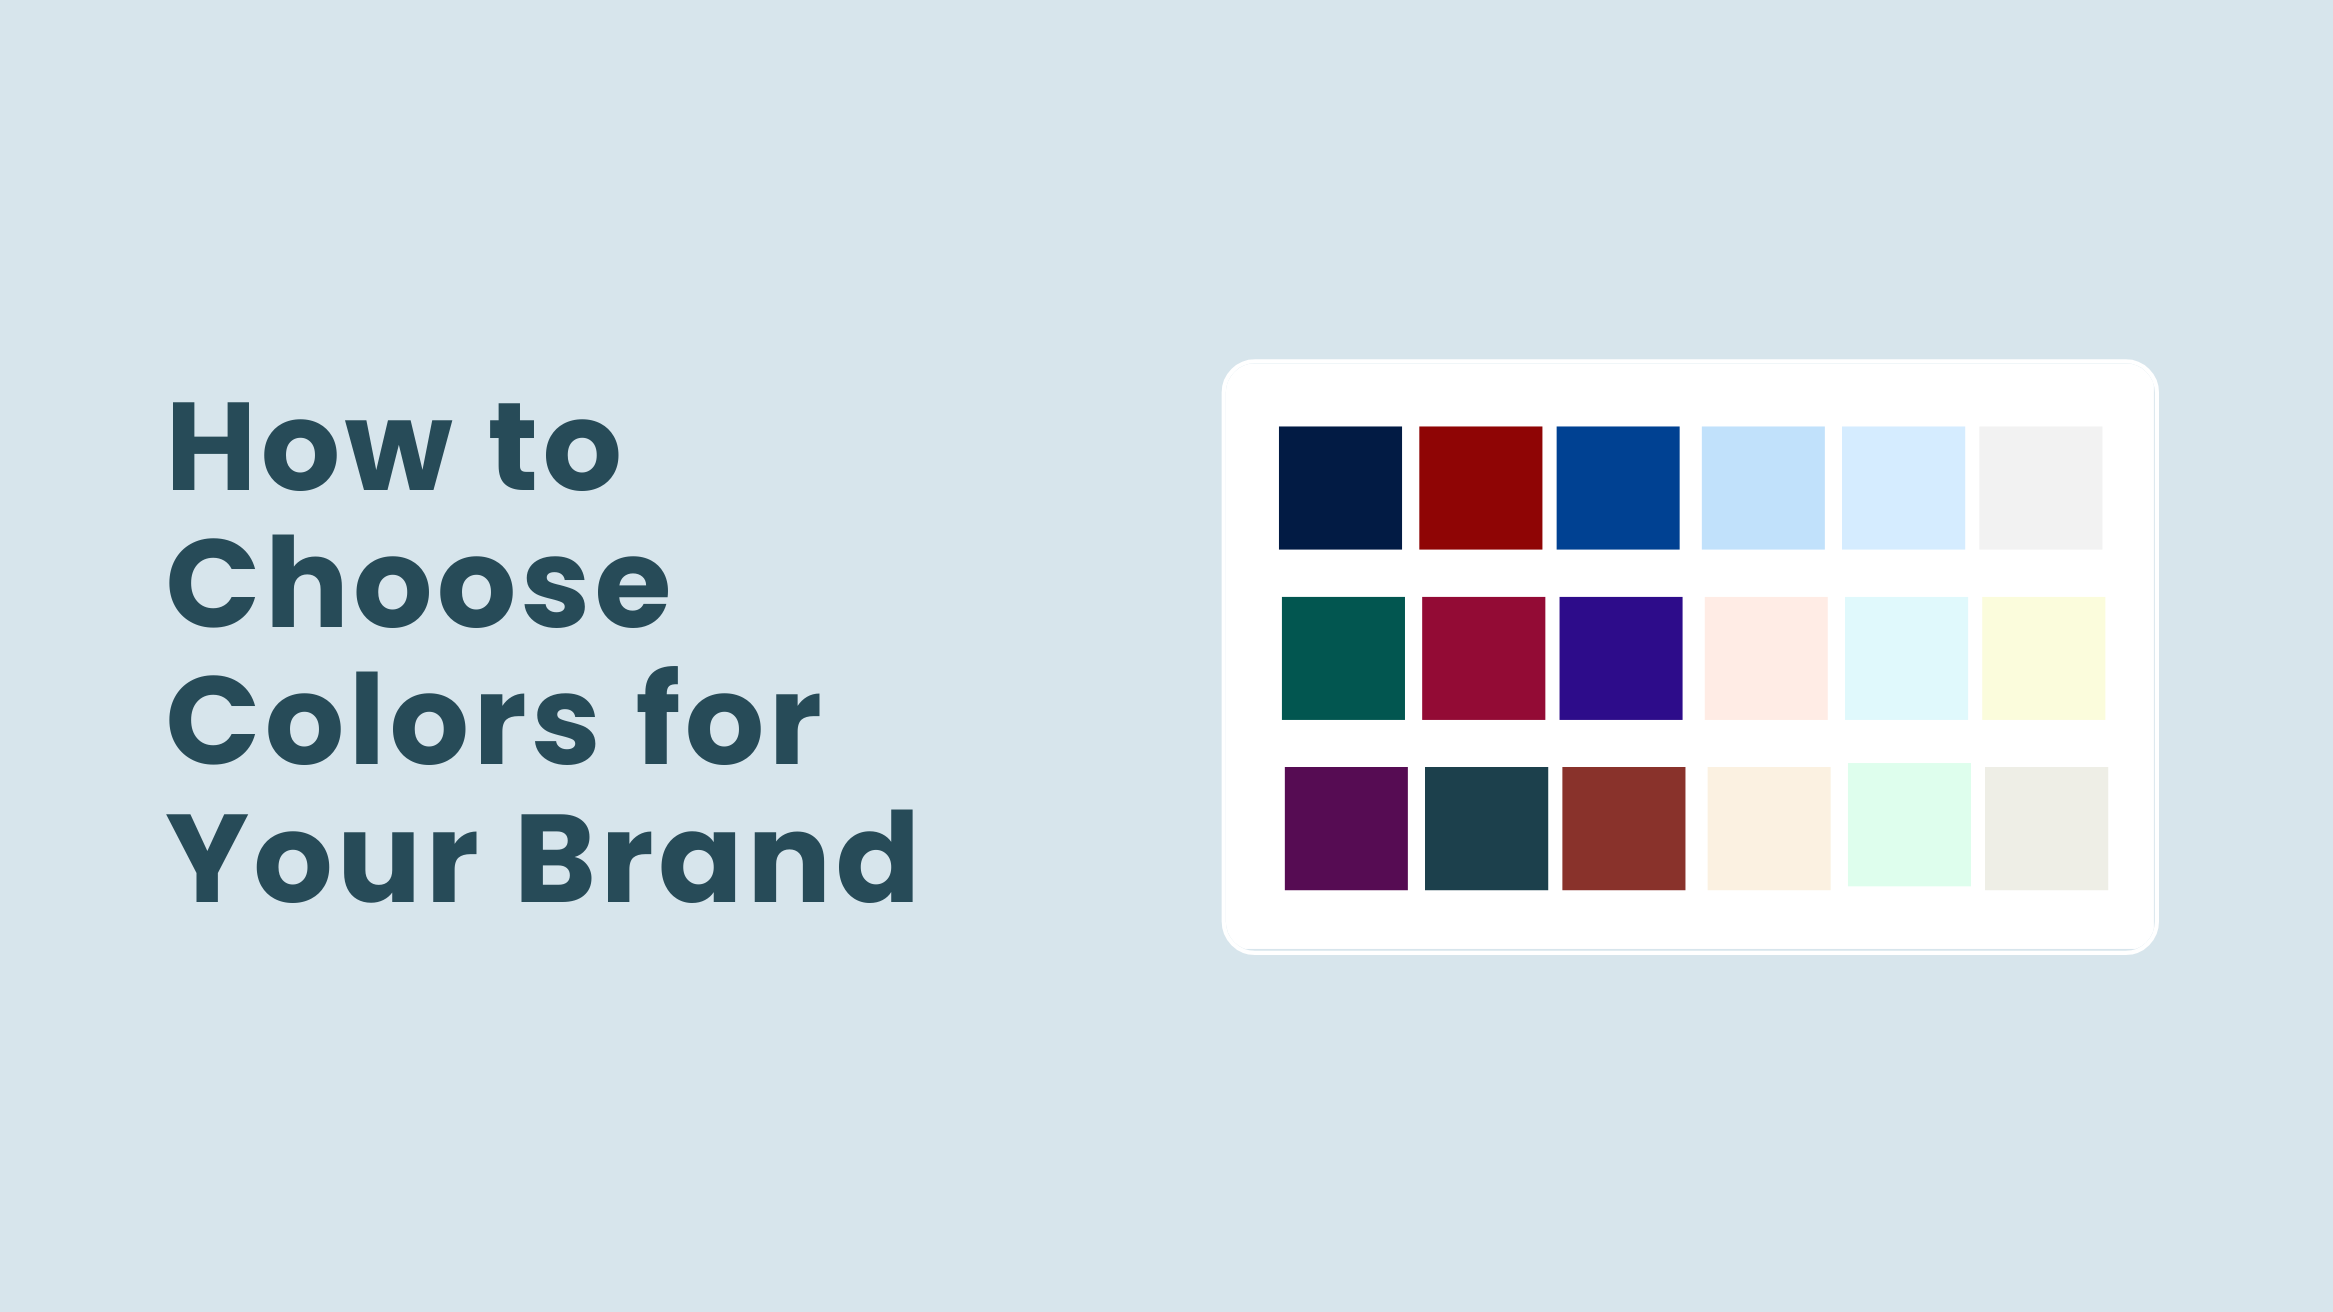 How to Choose Colors for Your Brand